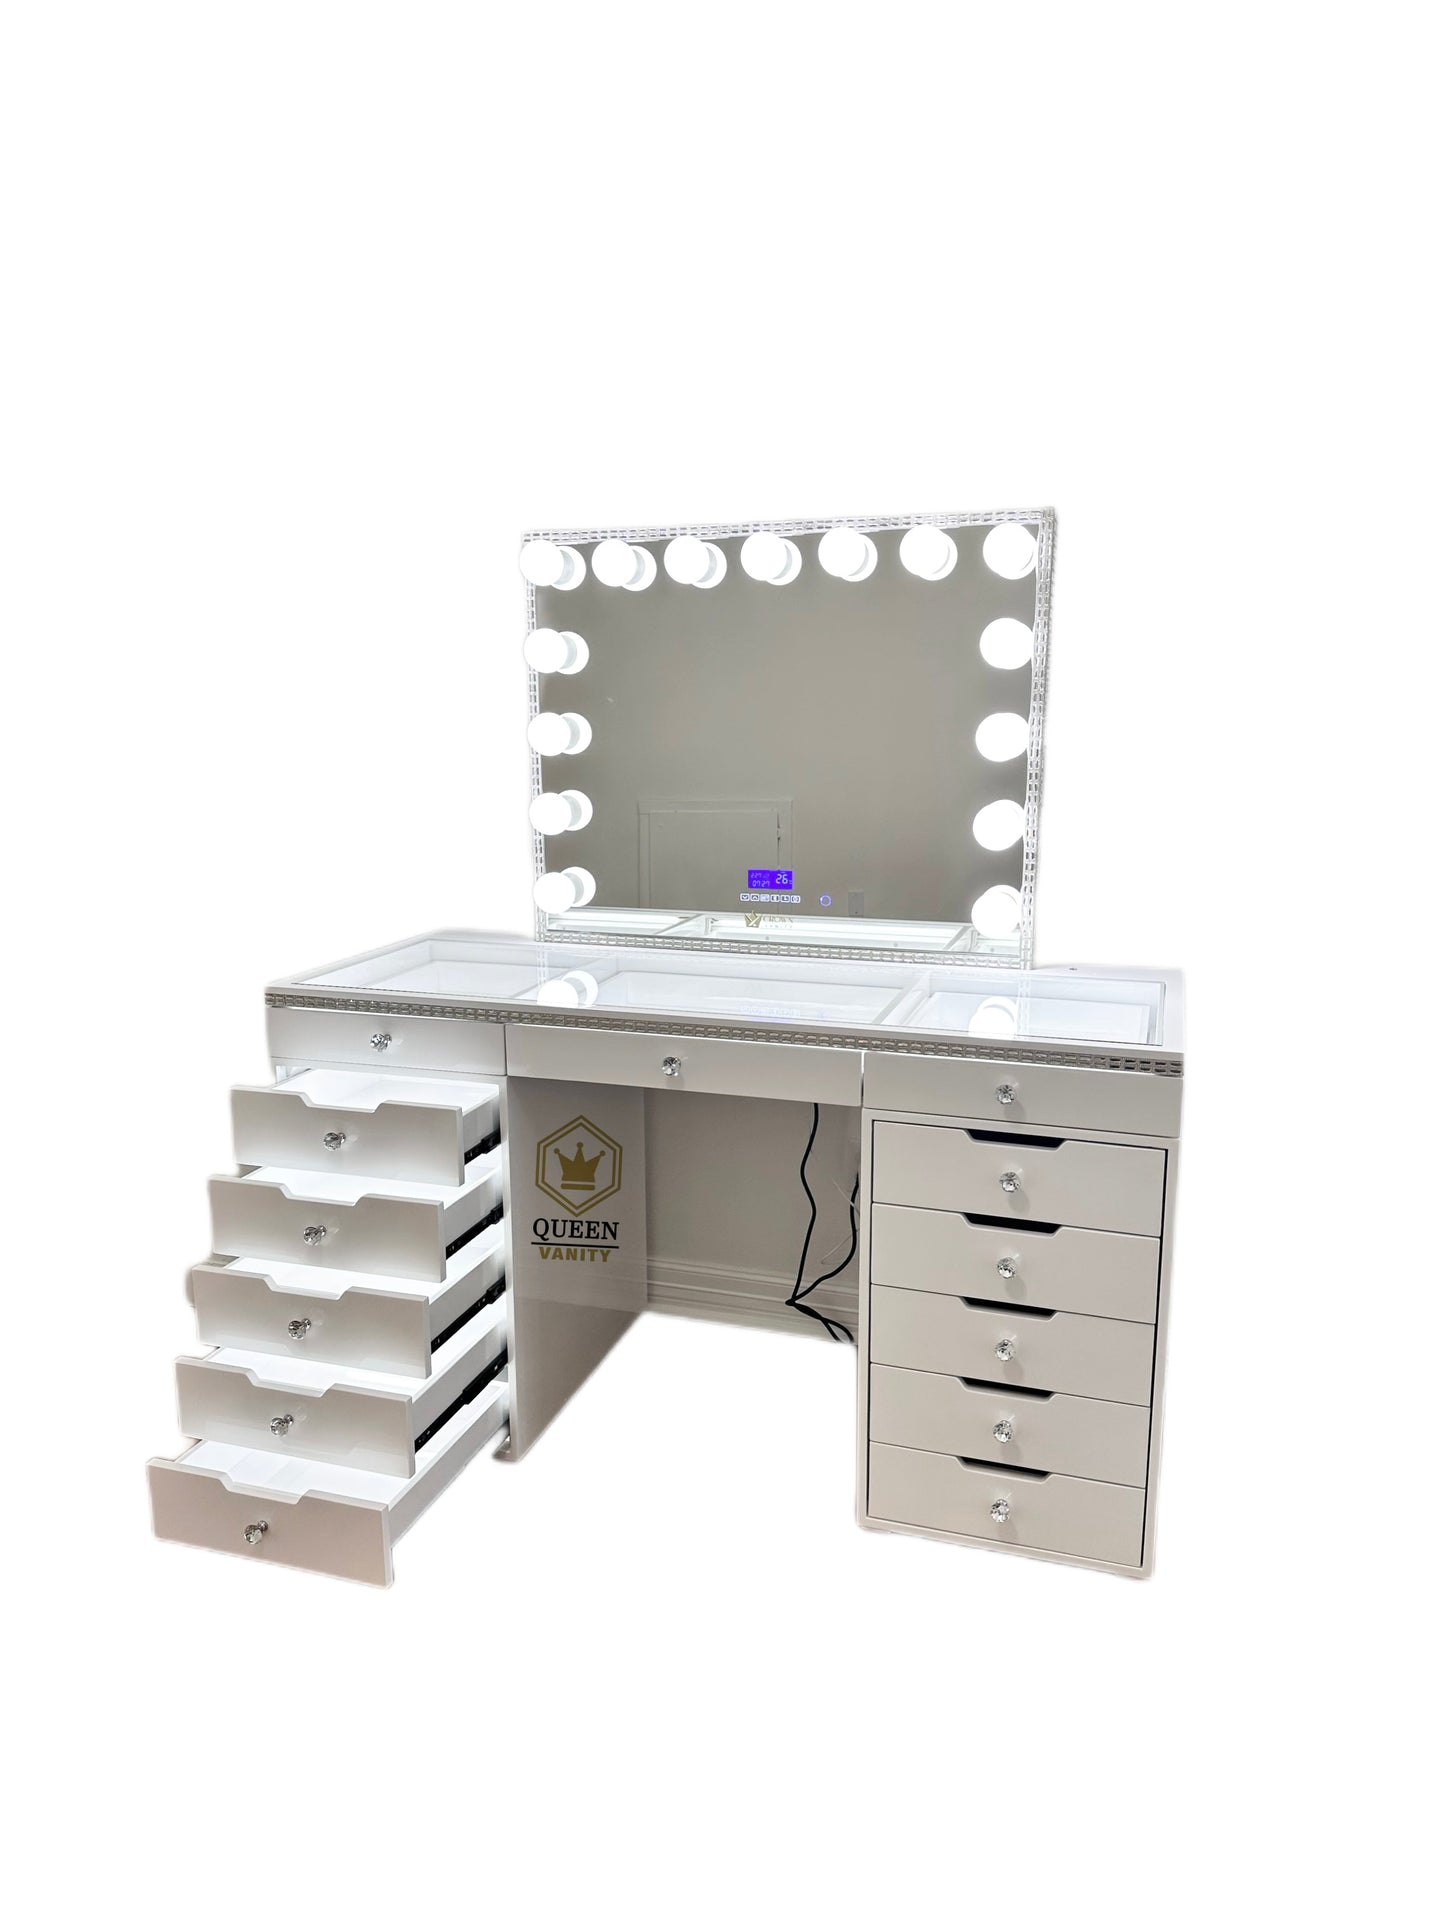 Marilyn Hollywood Makeup Vanity Station White Crystal Queen Vanity Outlet 